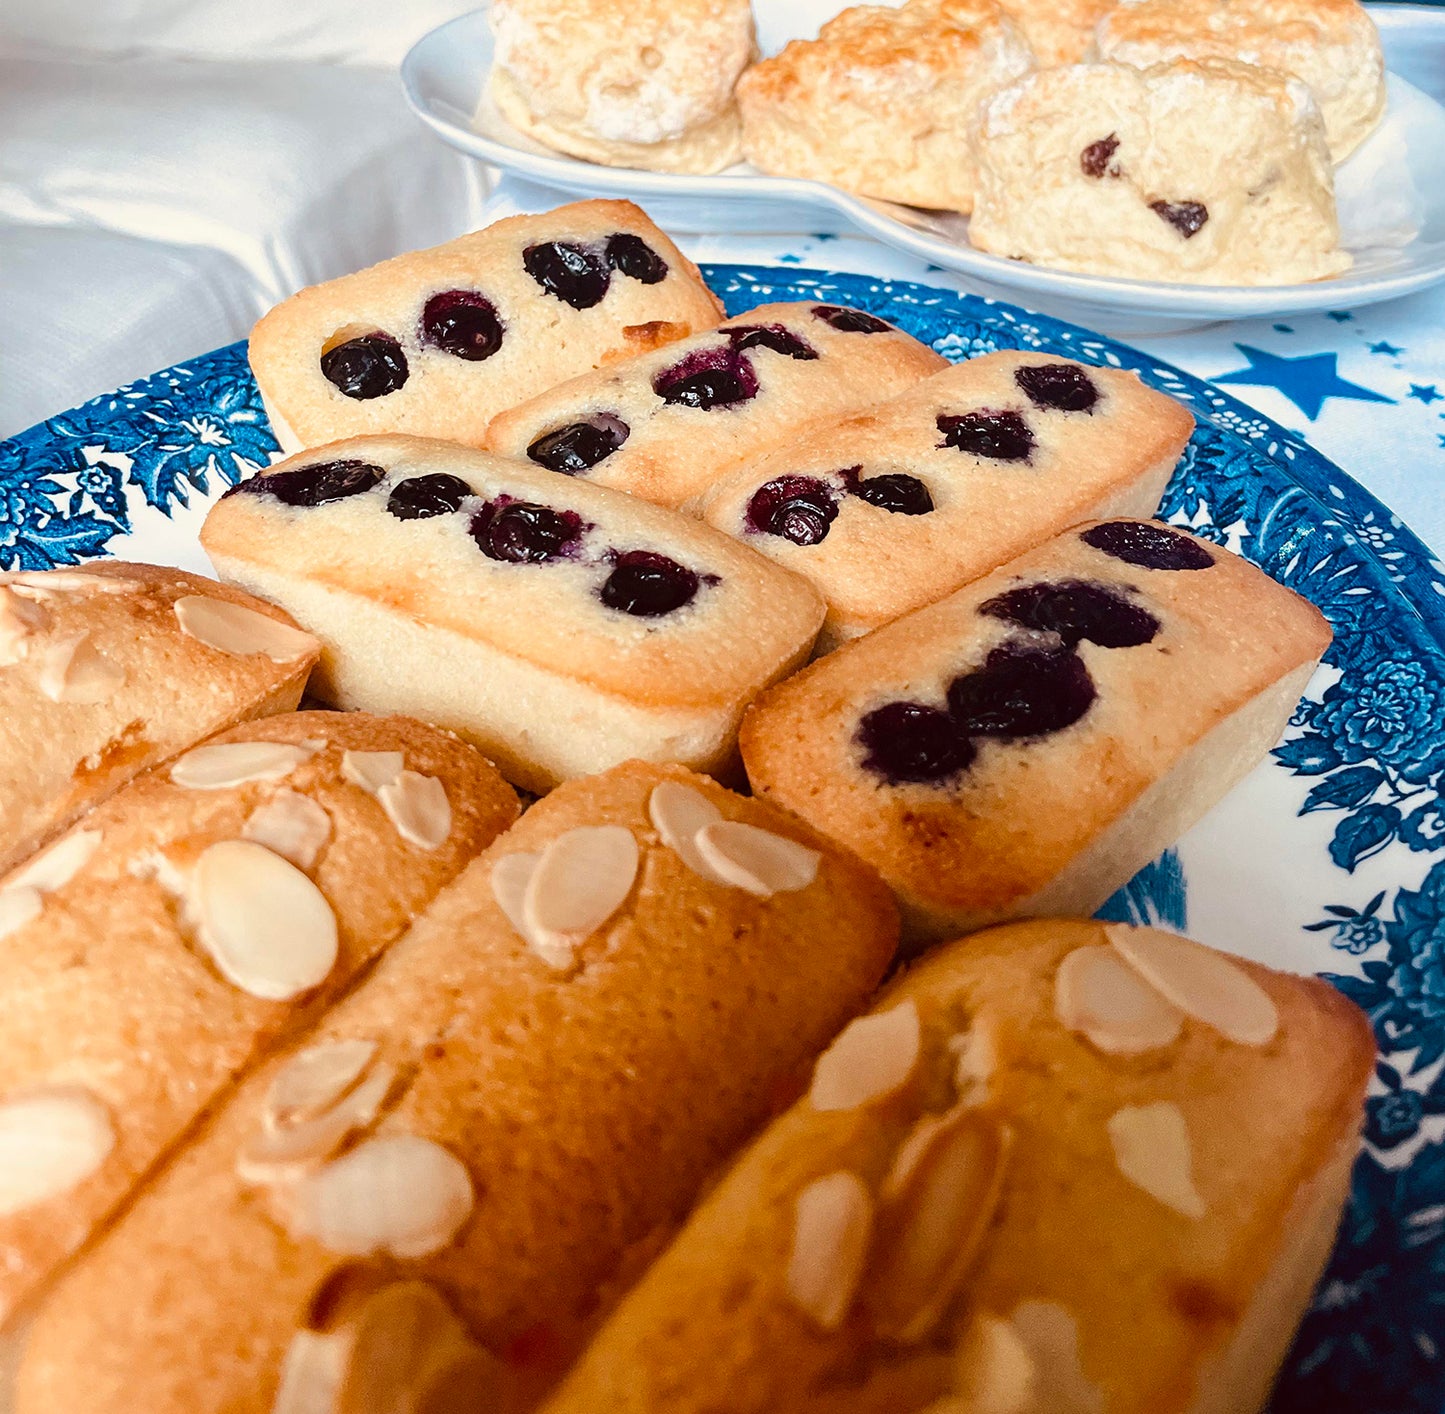  a plate of blueberry and plain almond financiers